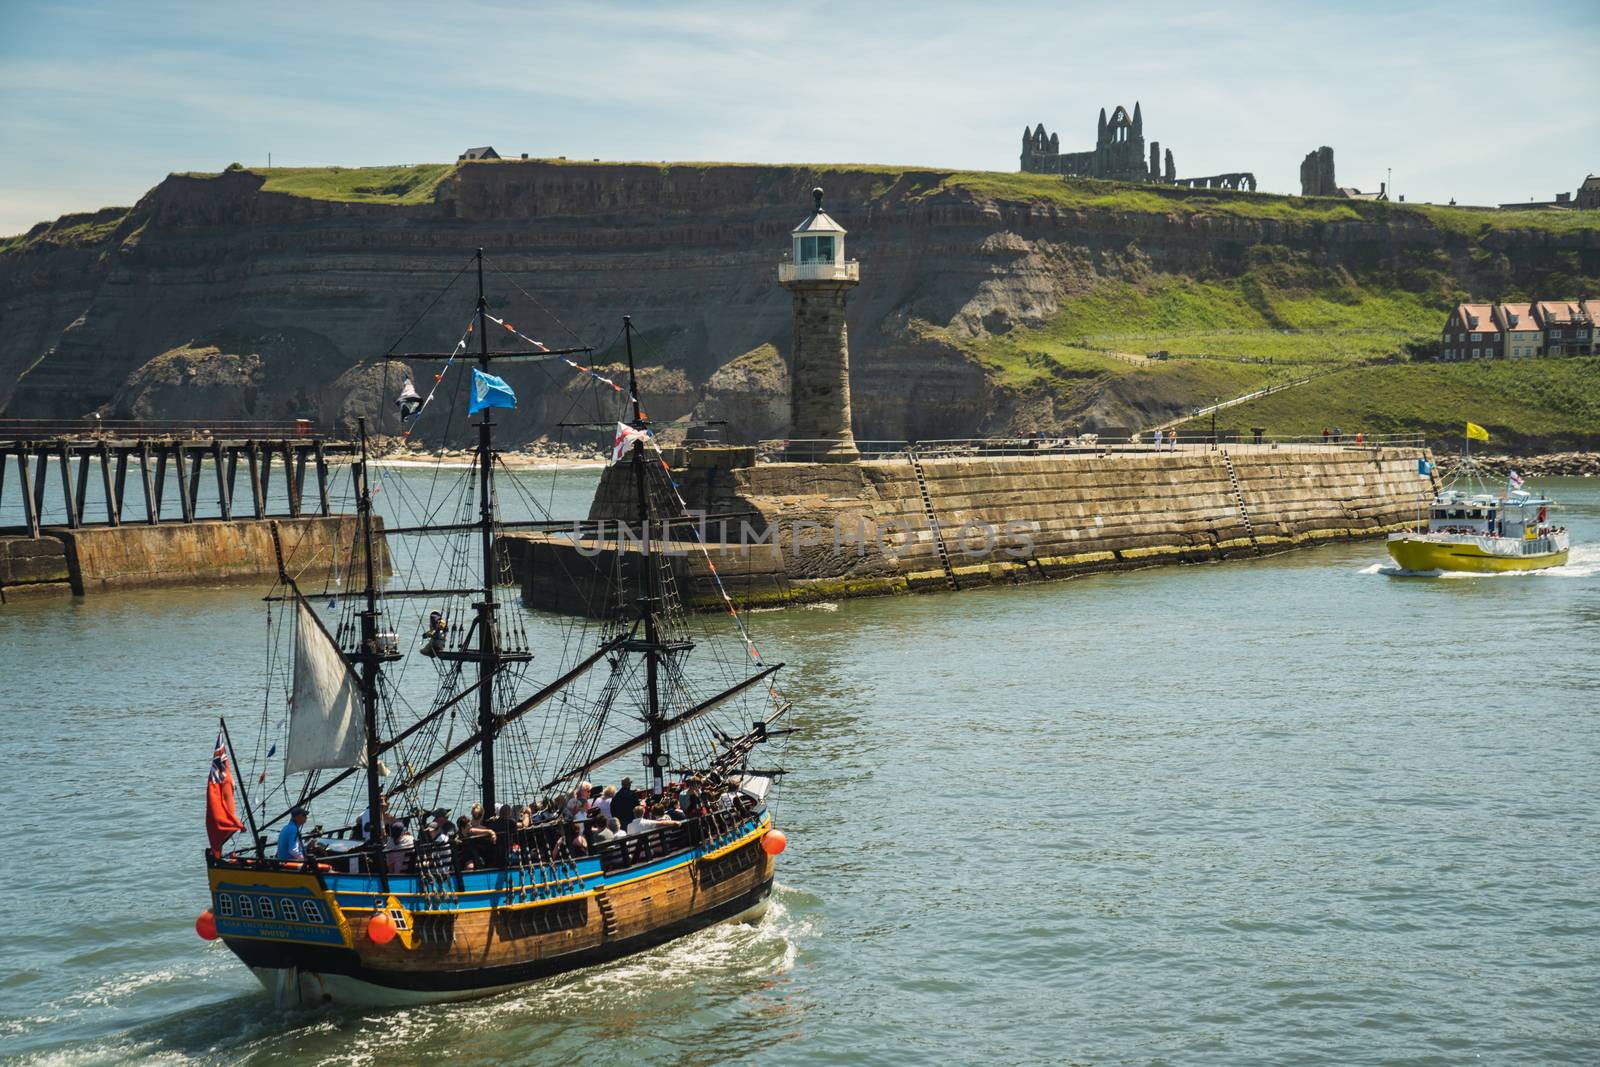 The HMS Endeavor tourist boat trip in Whitby's harbour